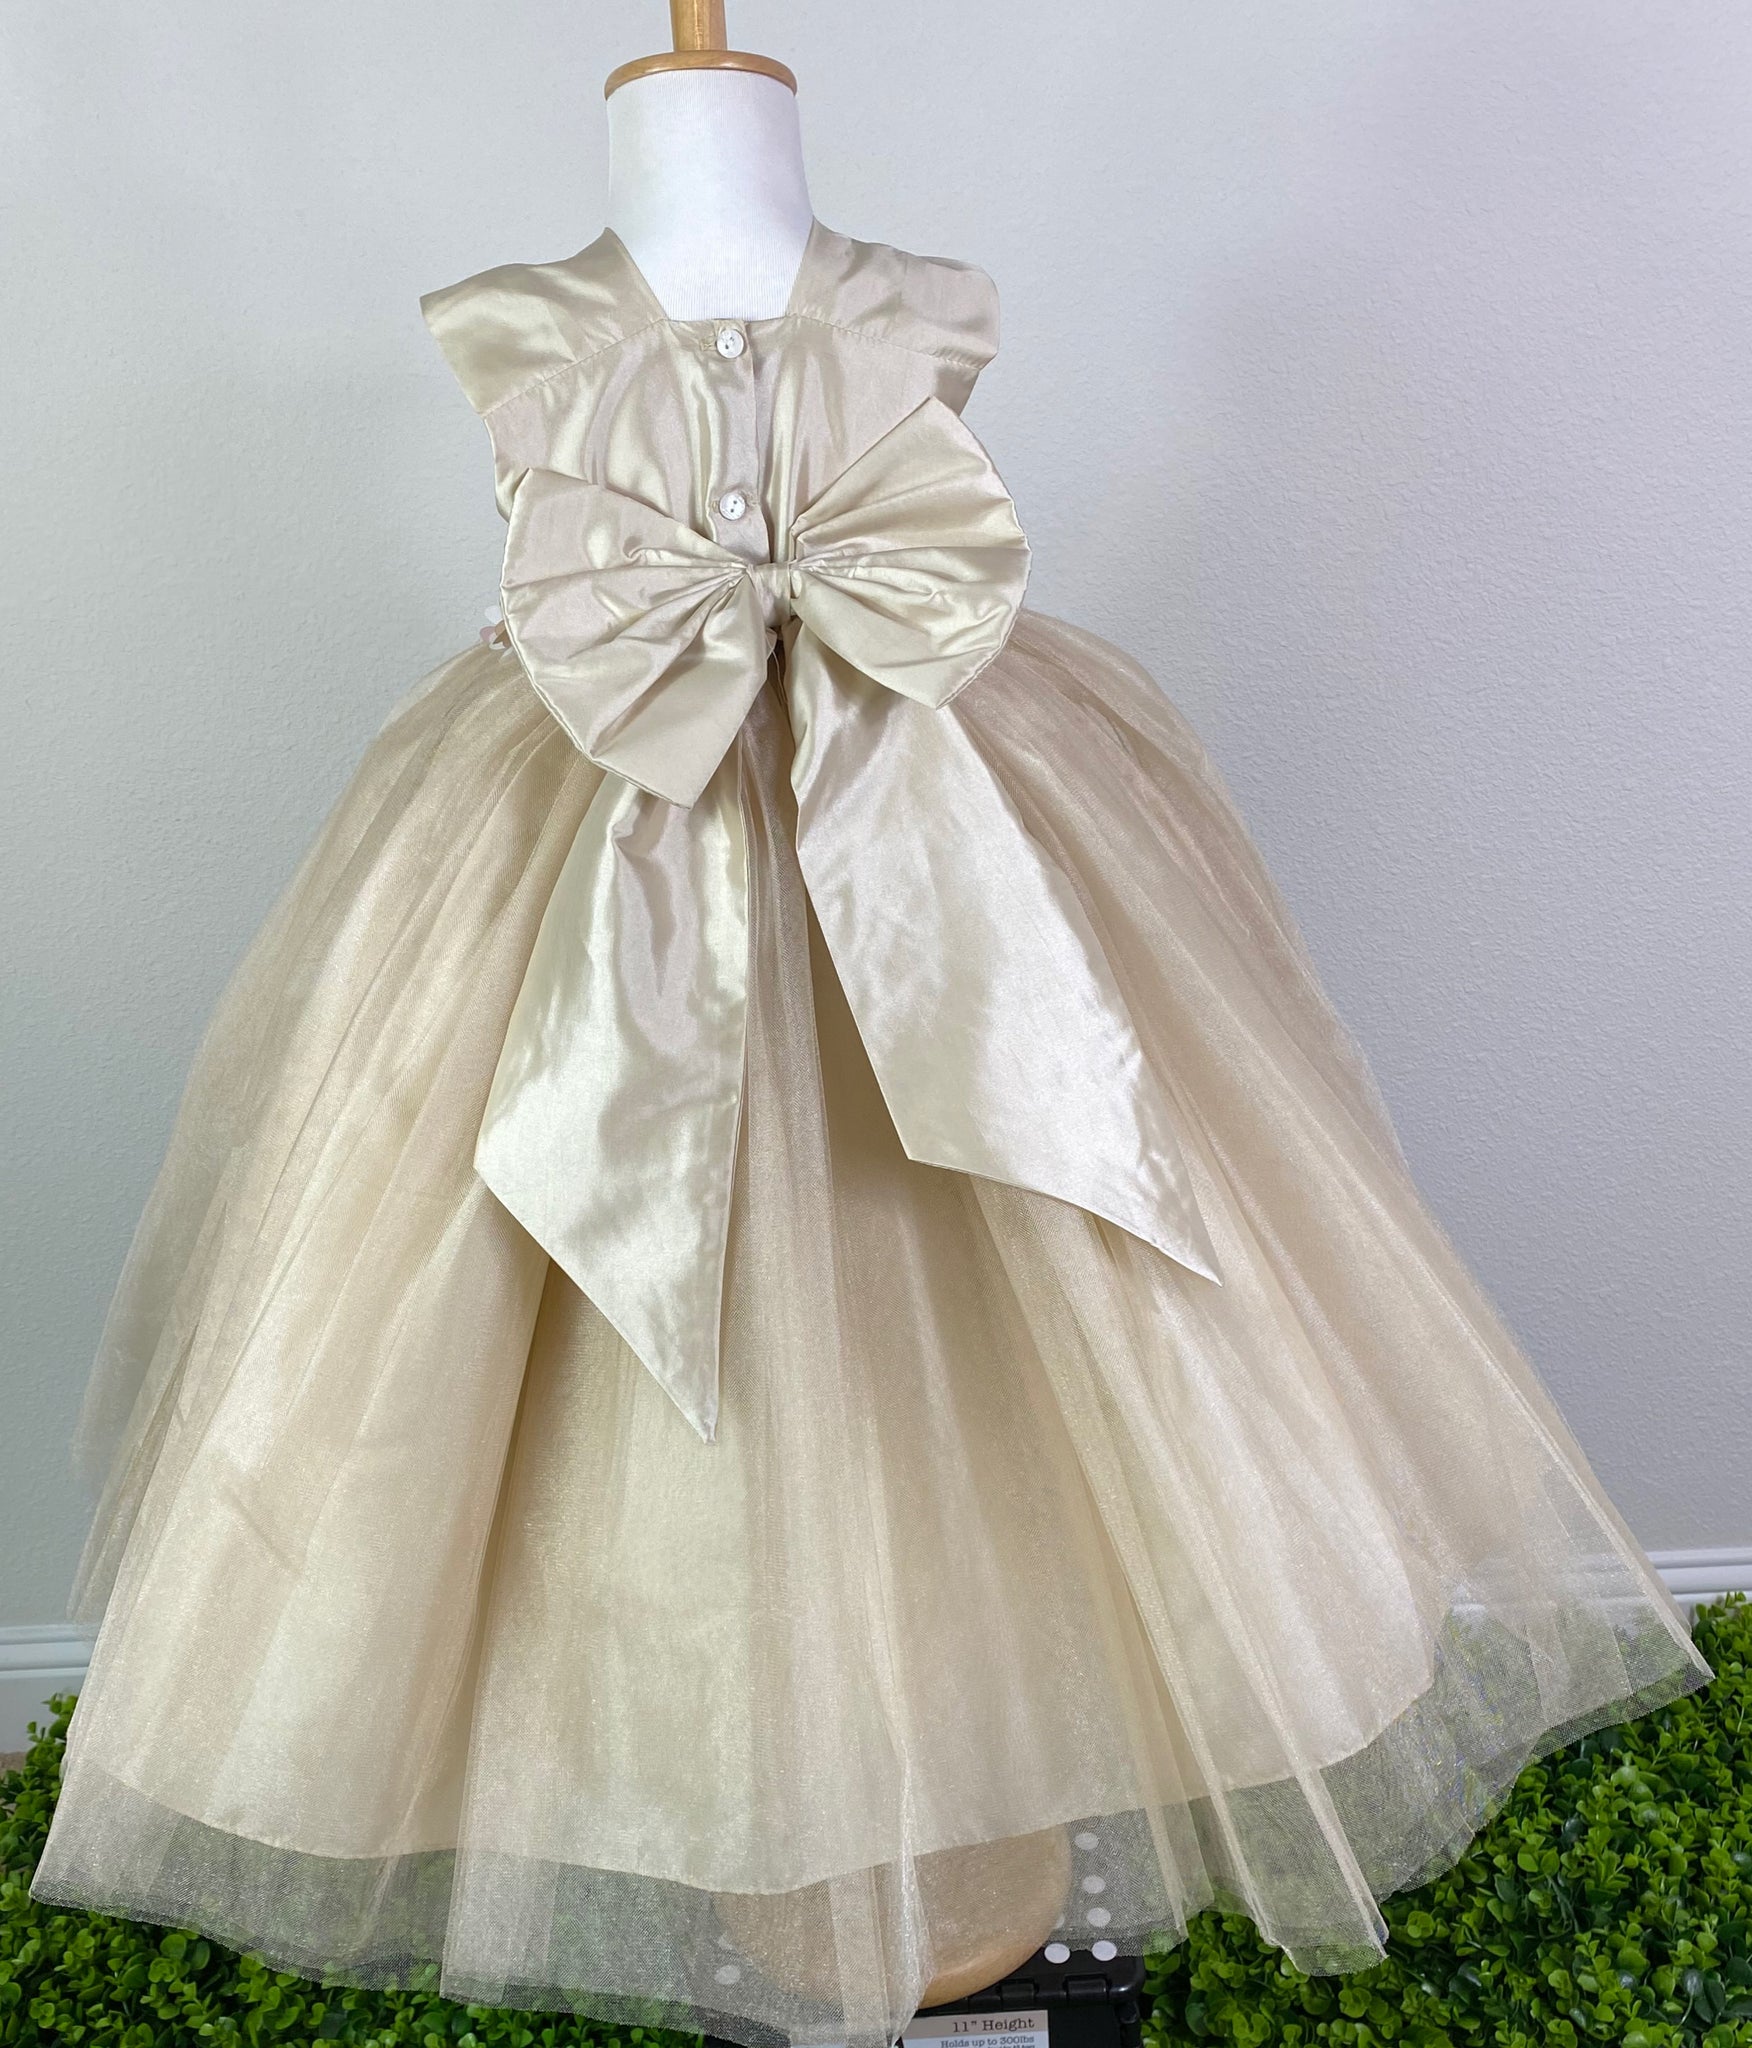  CHAMPAGNE  Champagne squared neck bodice Rose gold, ivory and brown flower with pearl center cummerbund Champagne ruched tulle and satin skirting Button closure Large champagne bow on back Dress pictured with a petticoat Petticoat not included  Choose from a tulle, cloth, or wire for best look